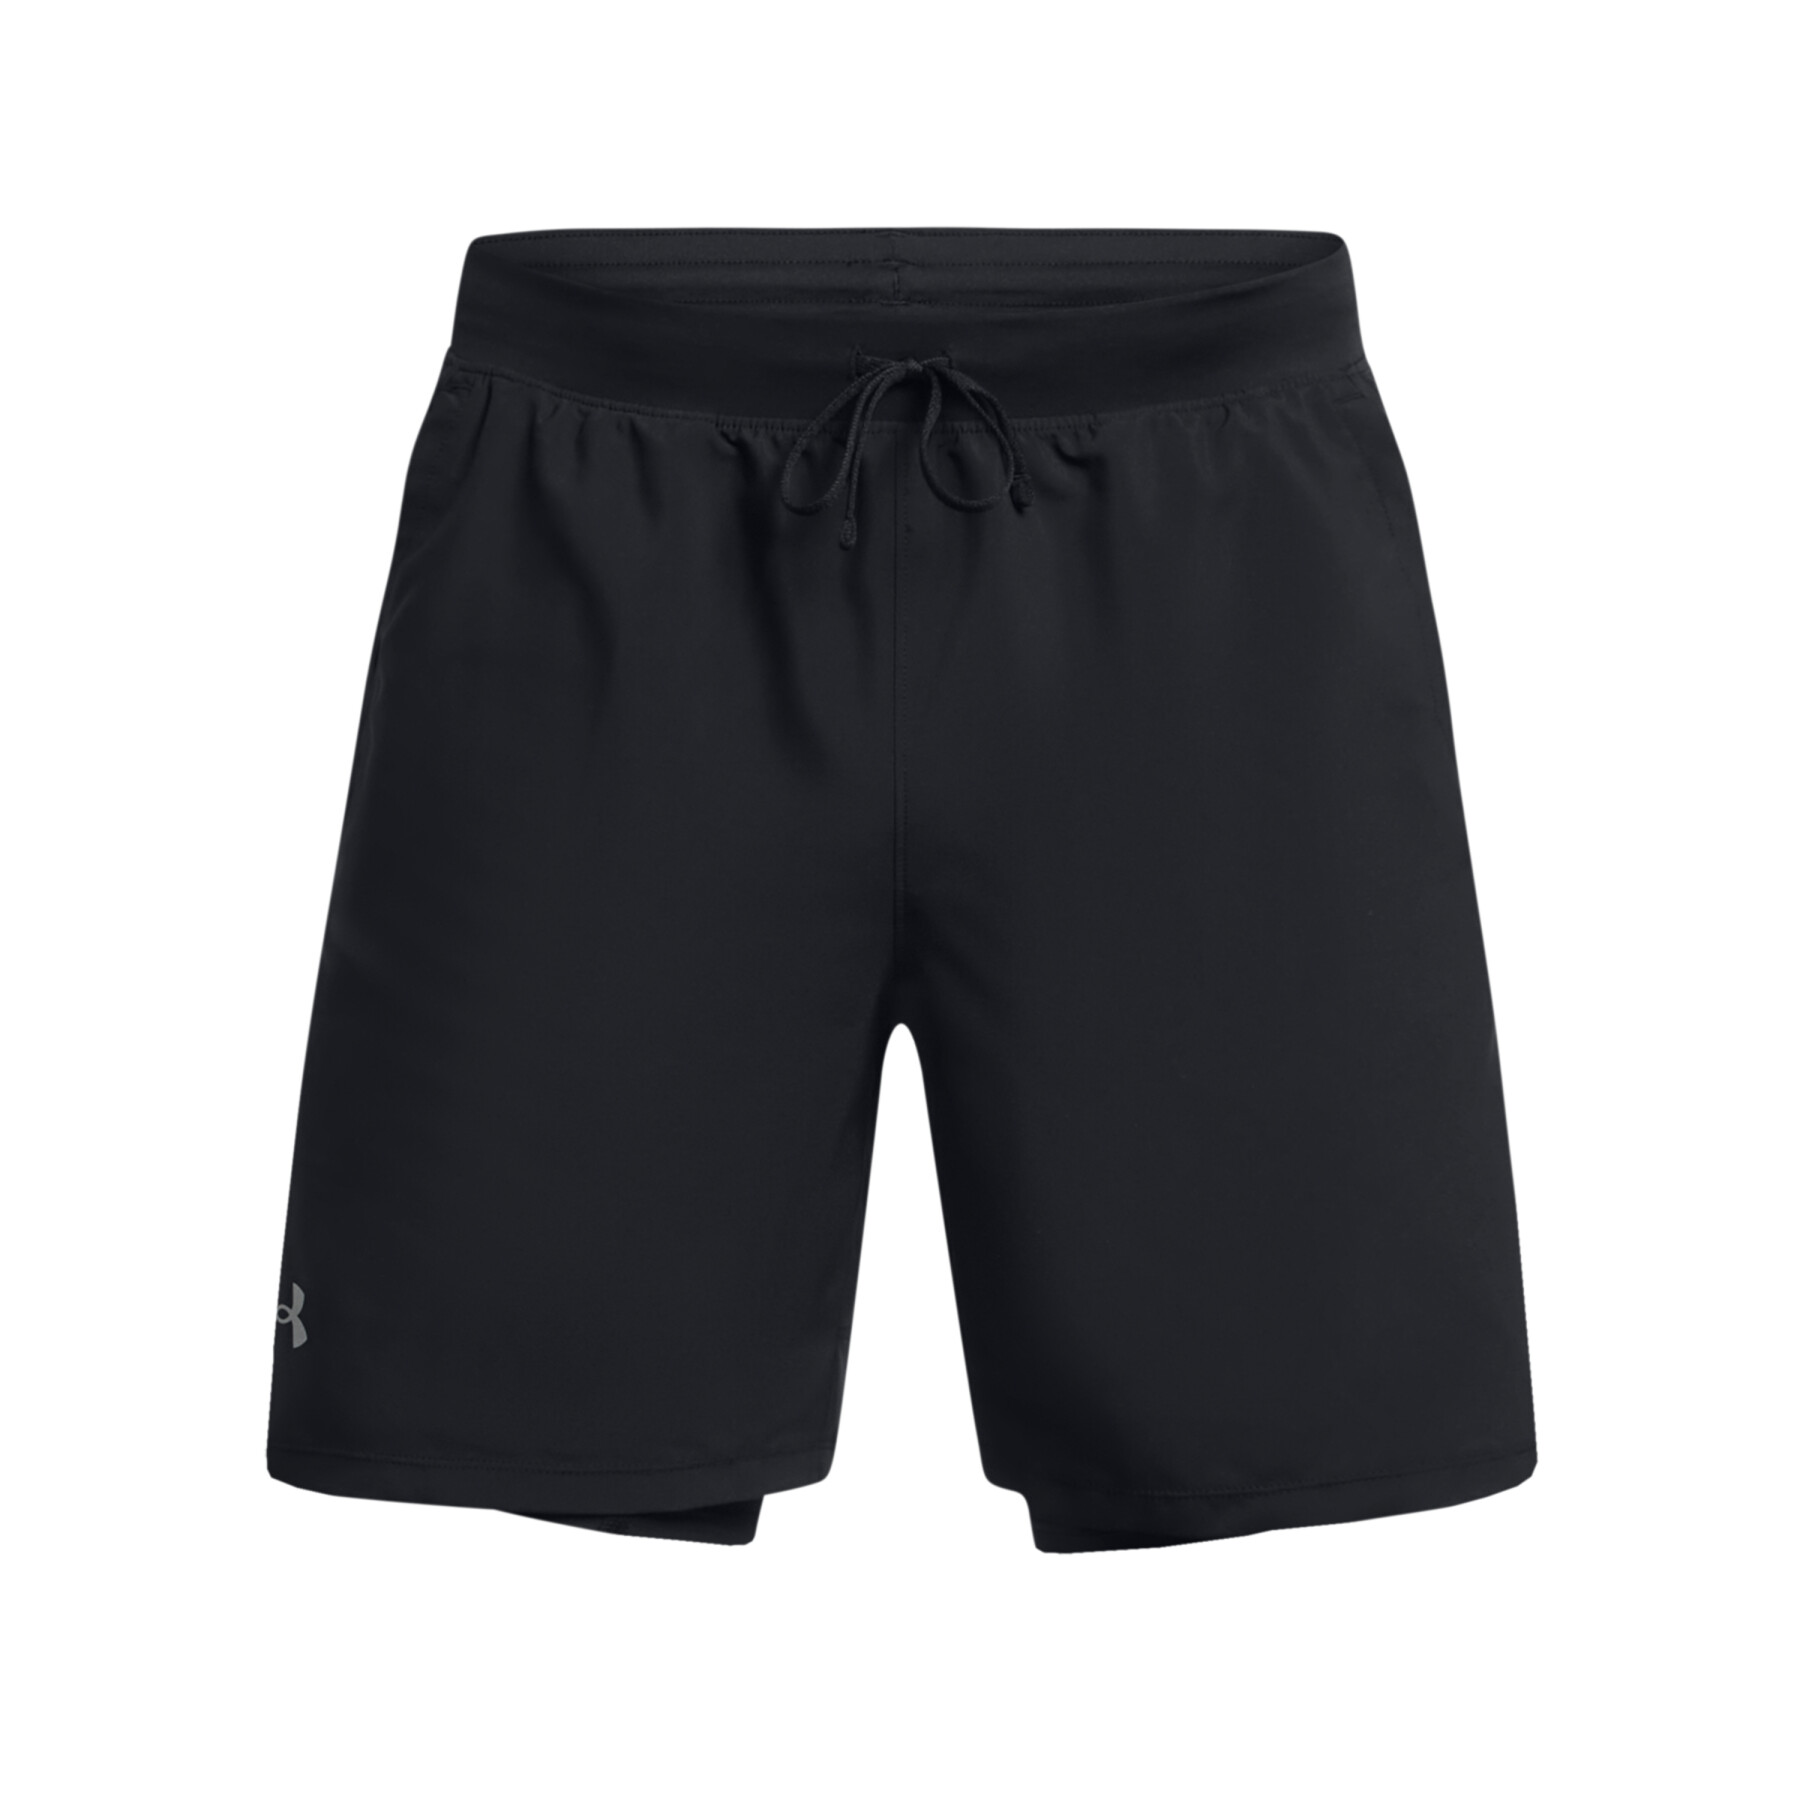 2 in 1 shorts Under Armour Launch 7"